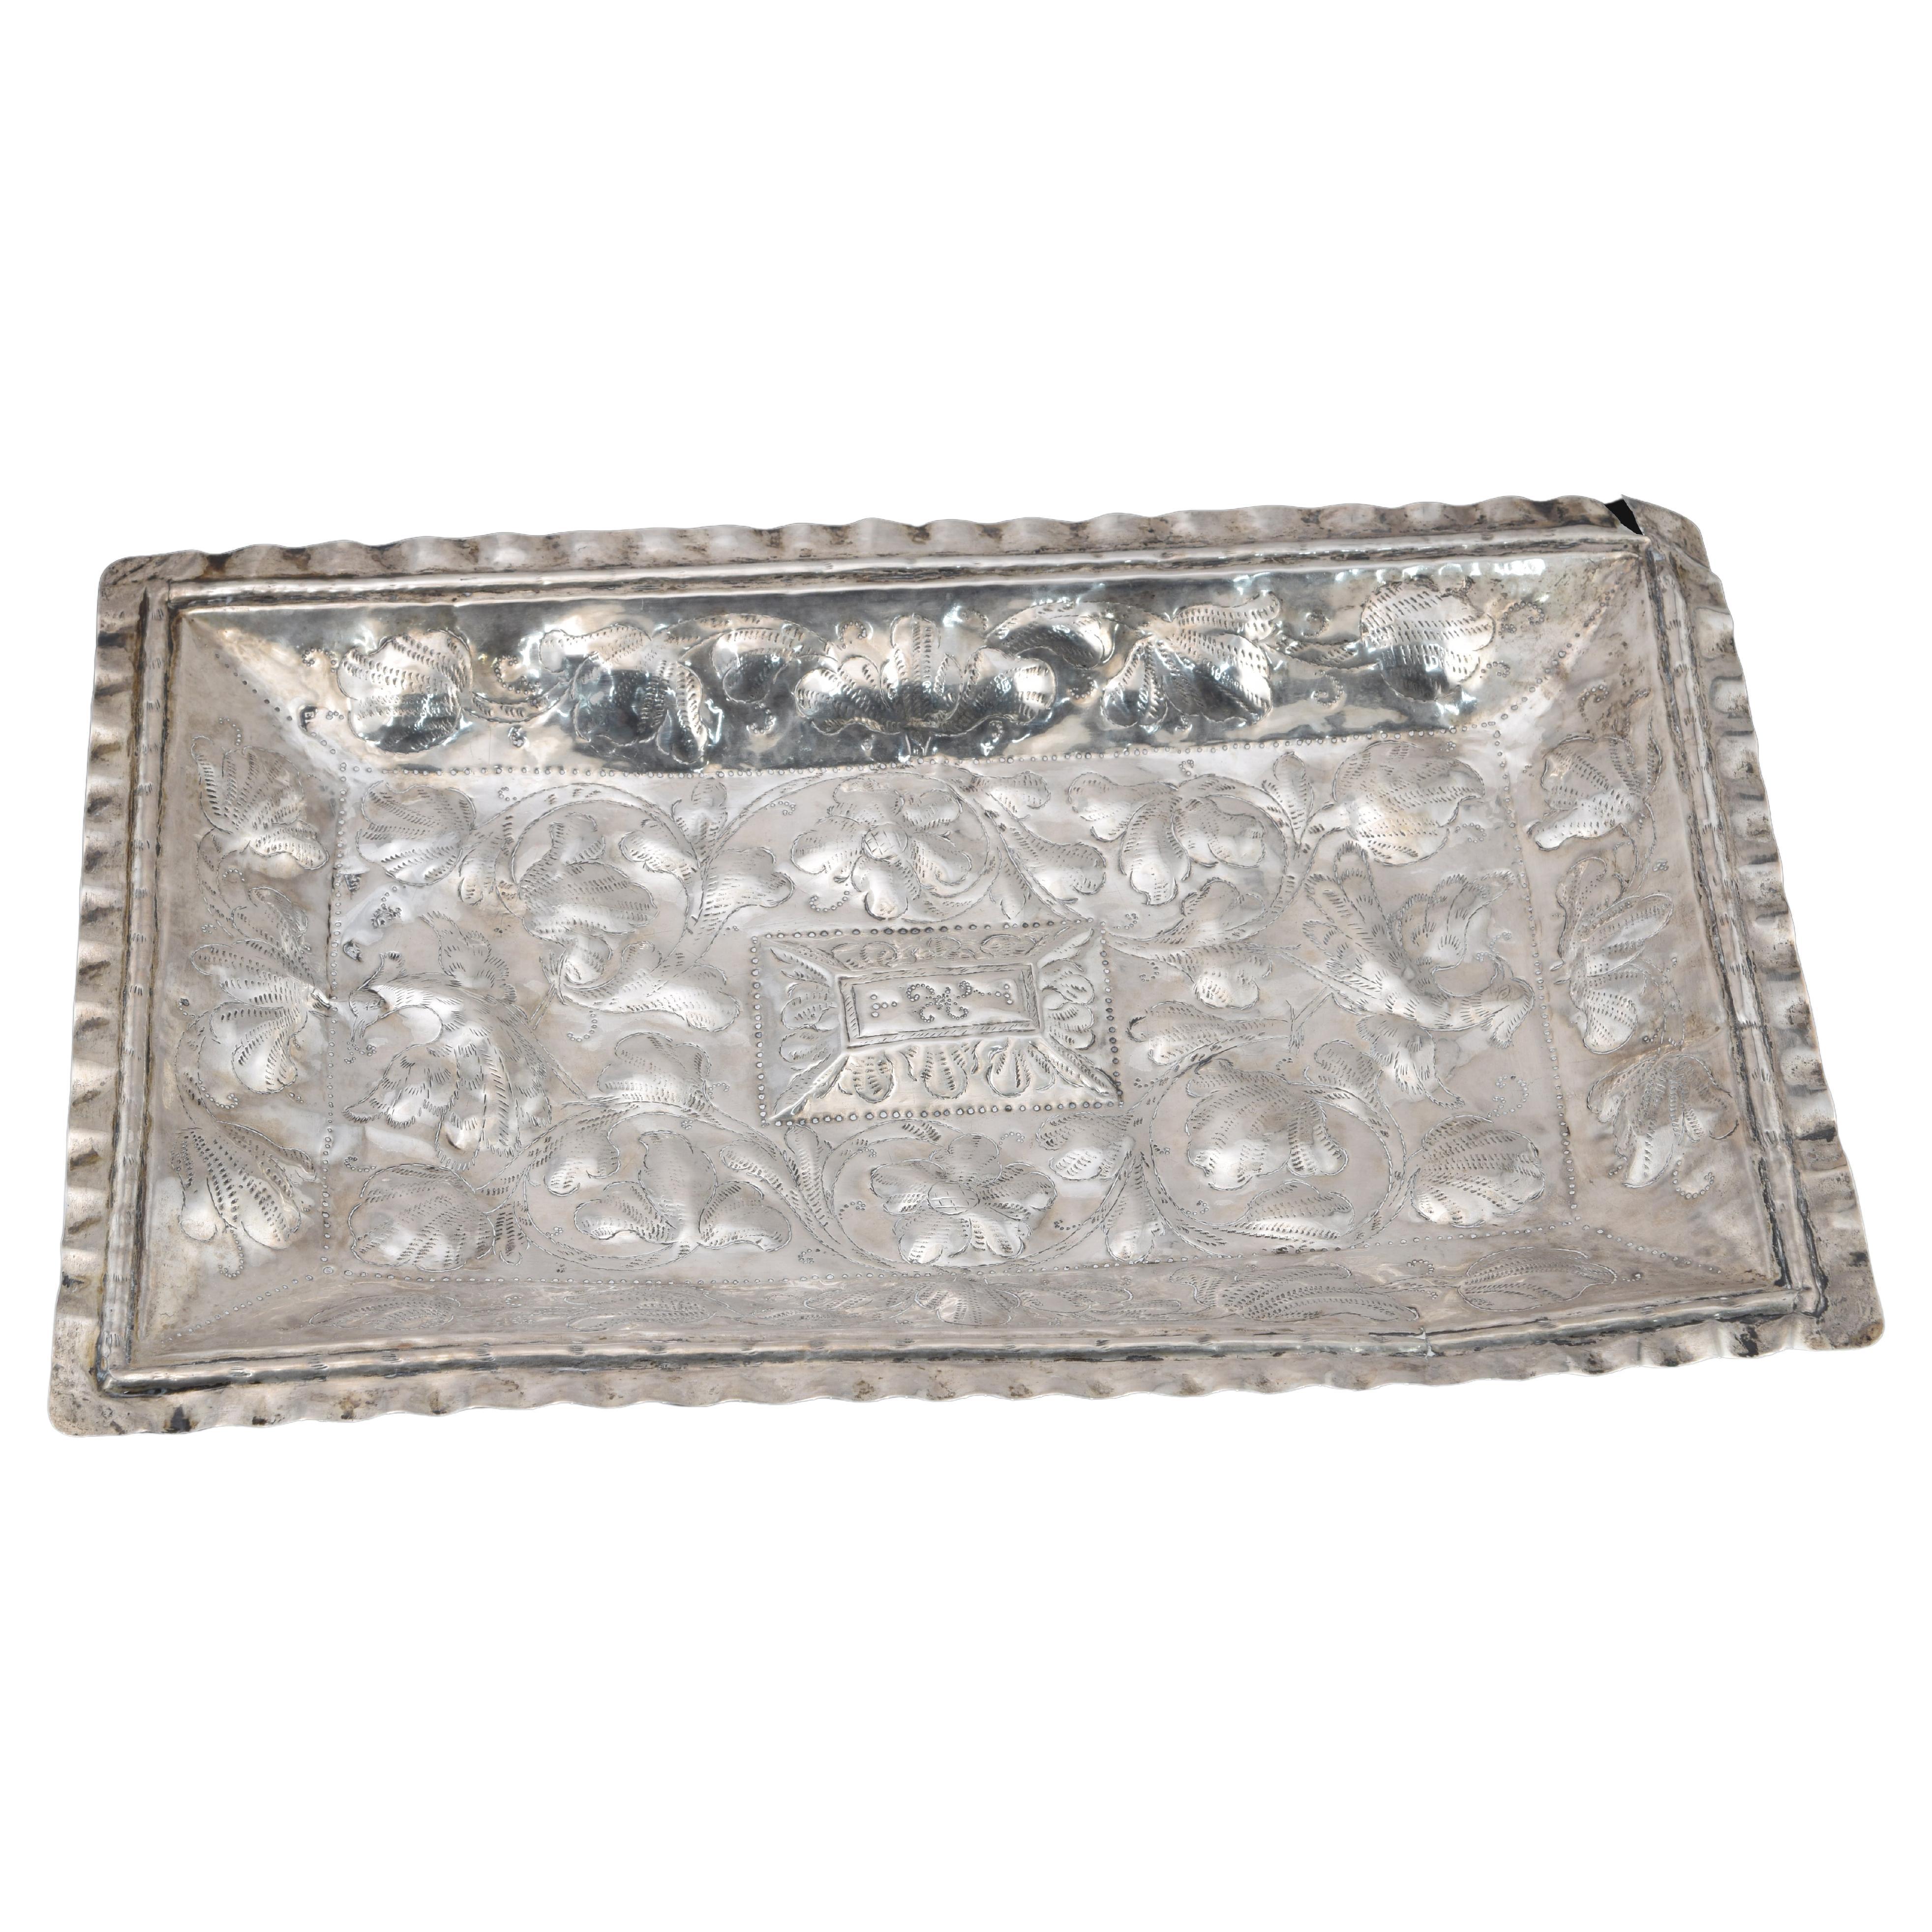 Silver tray. Possibly Spain, 20th century (after antique models).